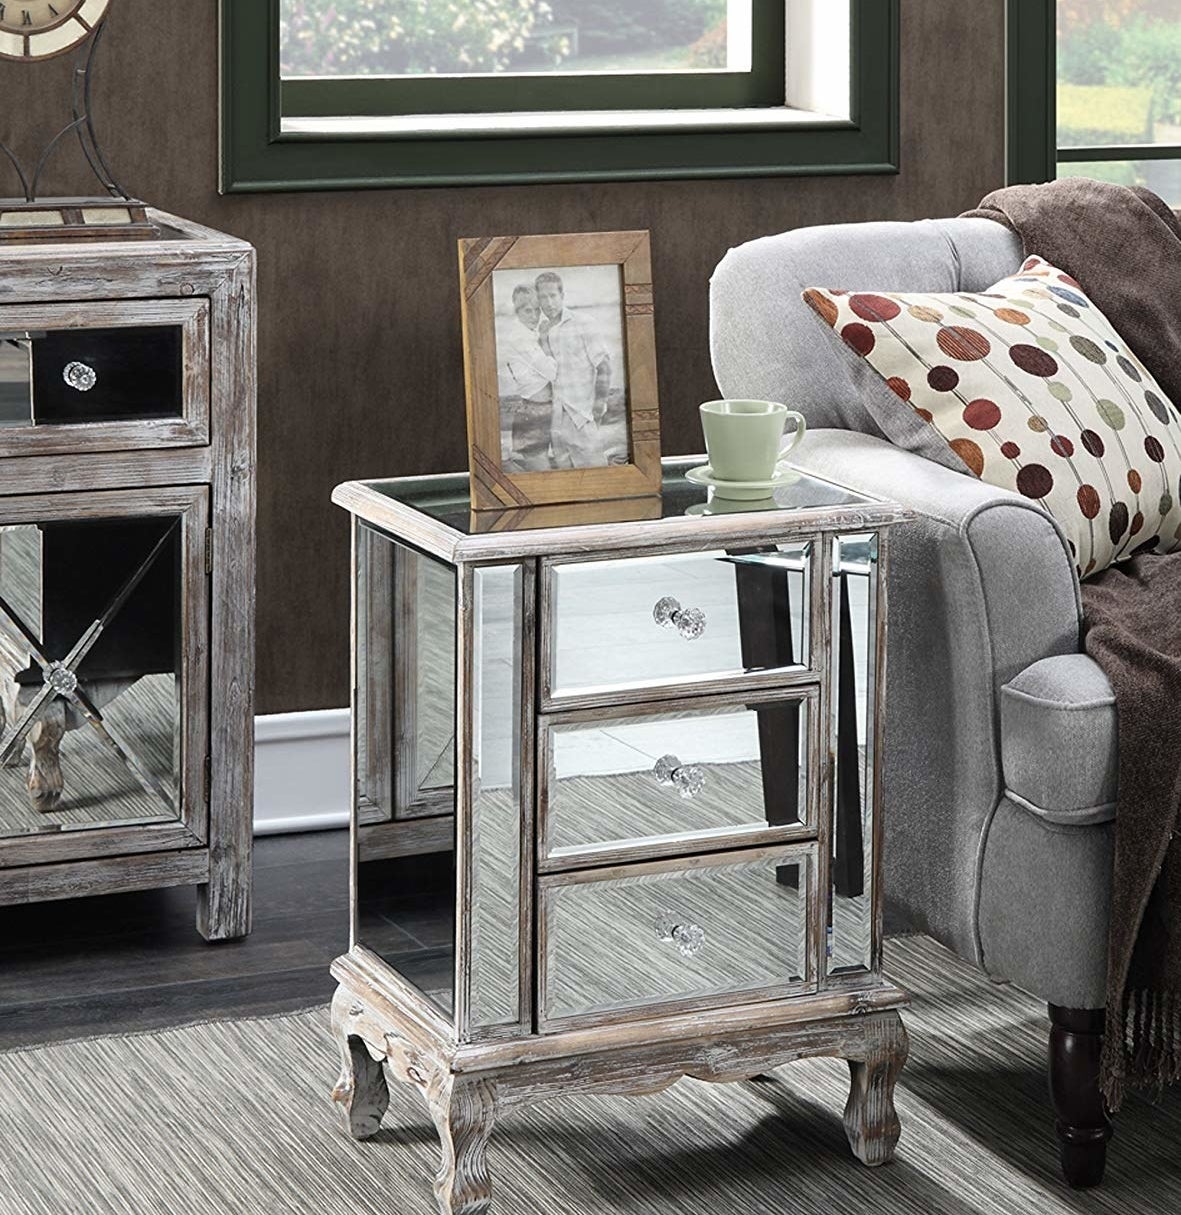 The mirrored end table with three shelves, crystal knobs, and wooden legs